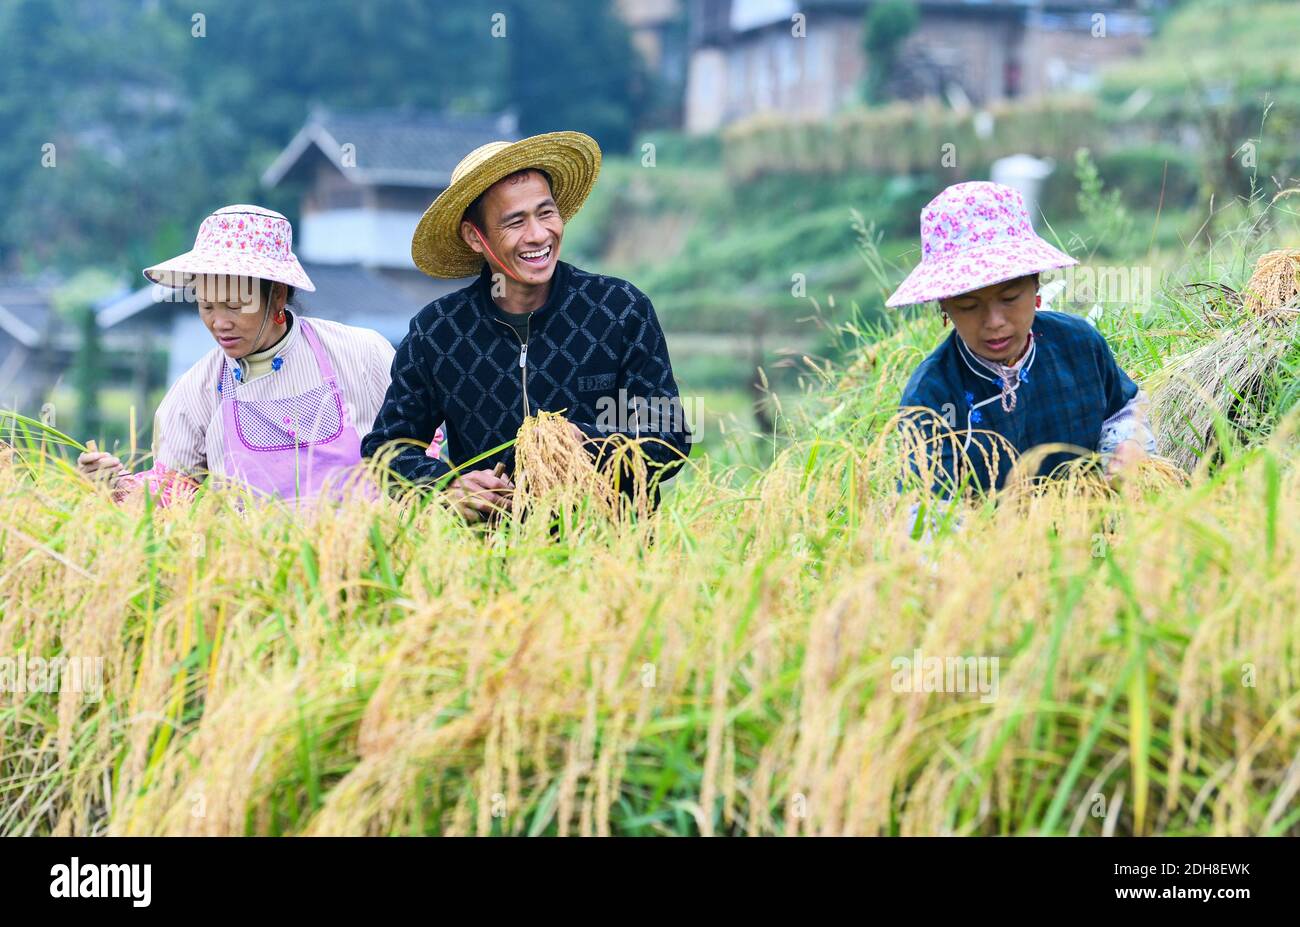 (201210) -- BEIJING, Dec. 10, 2020 (Xinhua) -- Farmers harvest rice at Jiache Village, Jiabang Township, Congjiang County of southwest China's Guizhou Province, Sept. 19, 2020. China's grain output reached nearly 670 billion kg in 2020, up 5.65 billion kg, or 0.9 percent, from last year, the National Bureau of Statistics (NBS) said on Thursday. This marks the sixth consecutive year that the country's total grain production has exceeded 650 billion kg. The bumper harvest comes despite disrupted farming as a result of the COVID-19 epidemic, which has been held in check thanks to efforts to ens Stock Photo